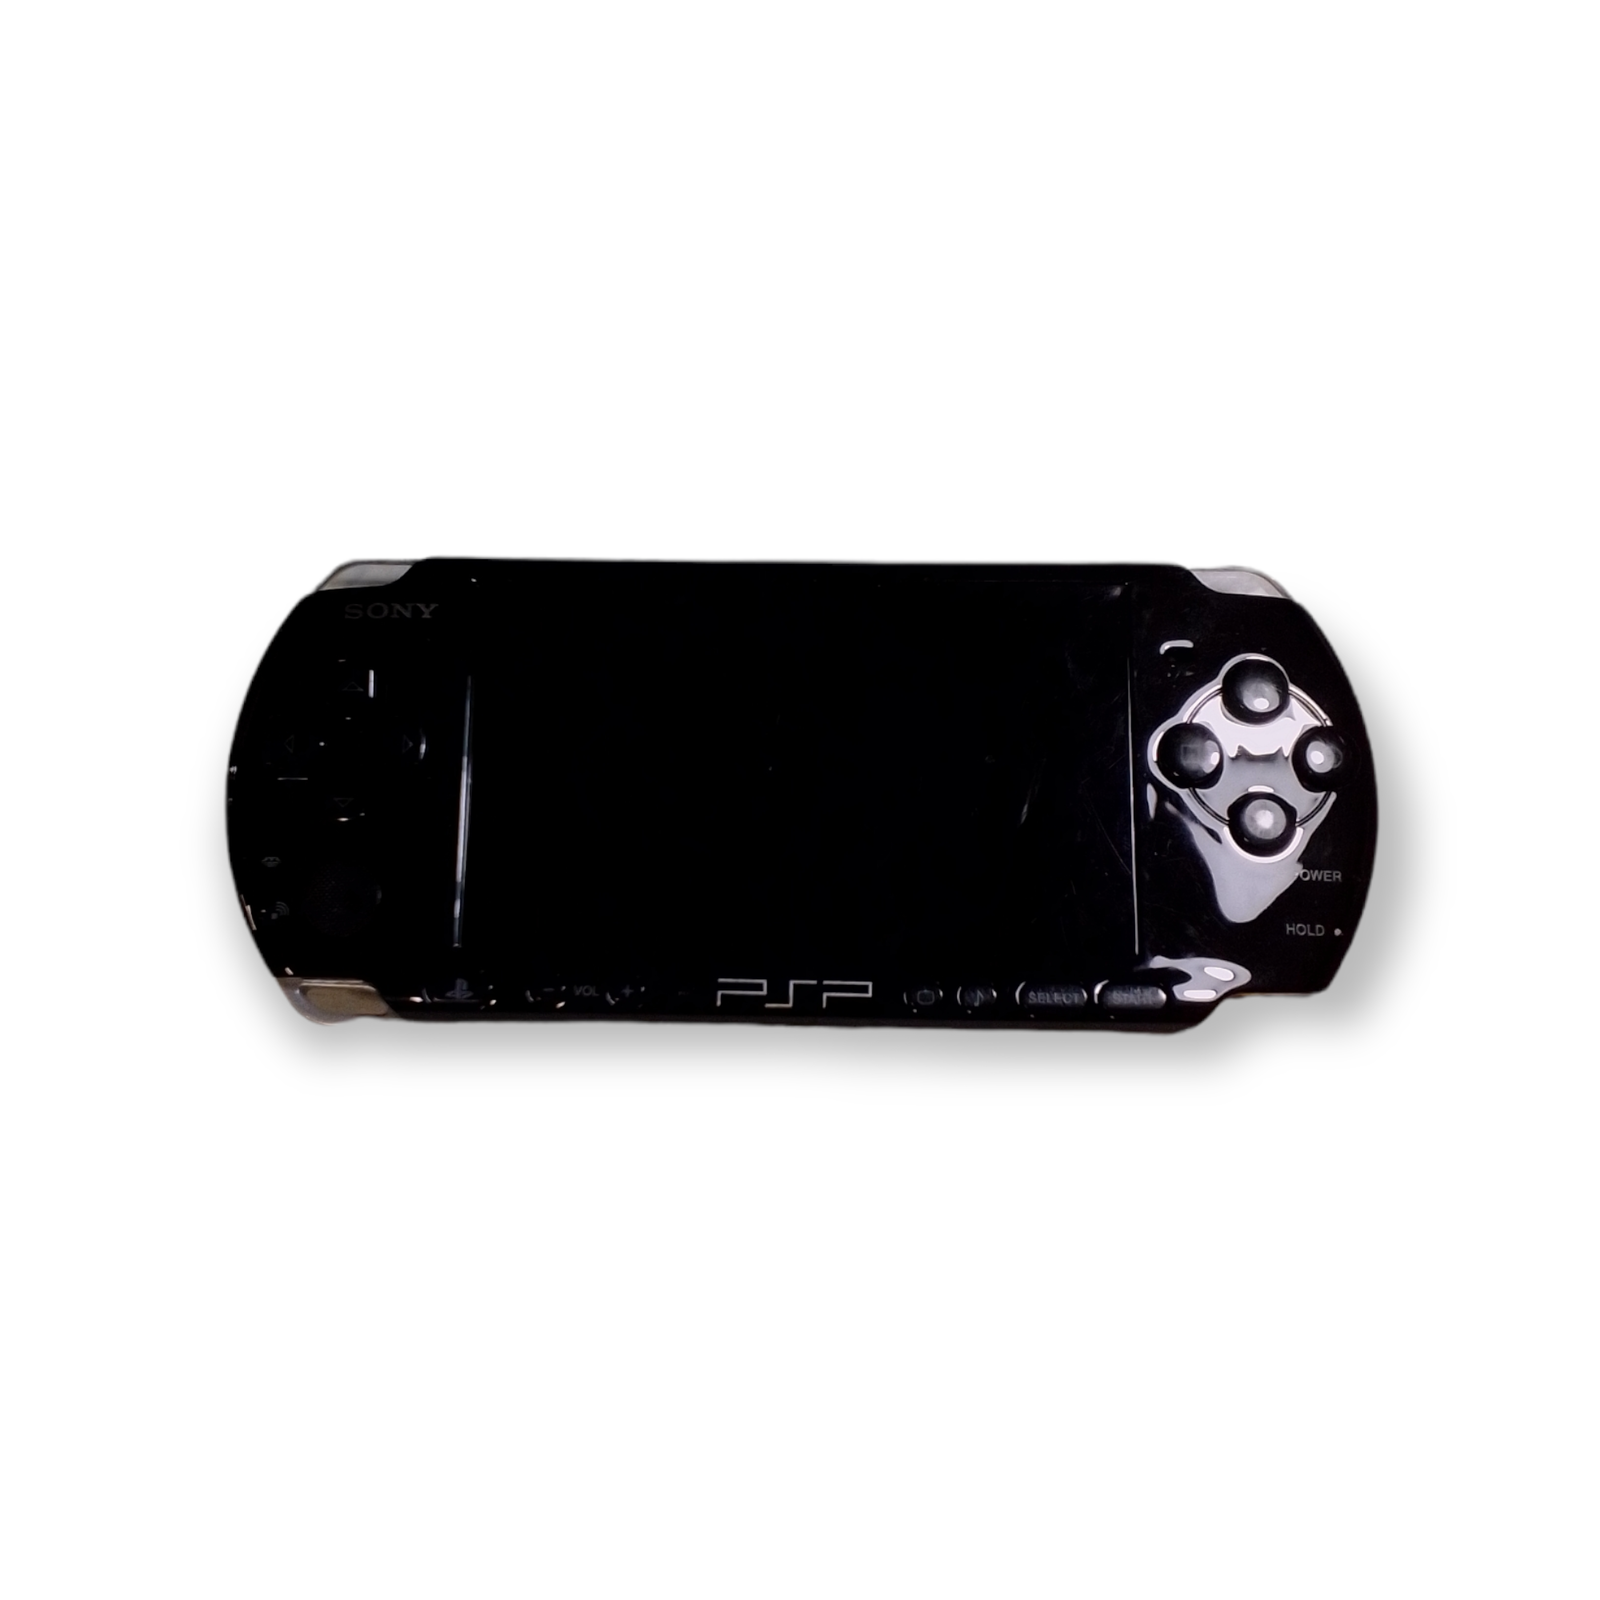 PlayStation Portable 3000 Core Pack System (Piano Black) [Japanese 